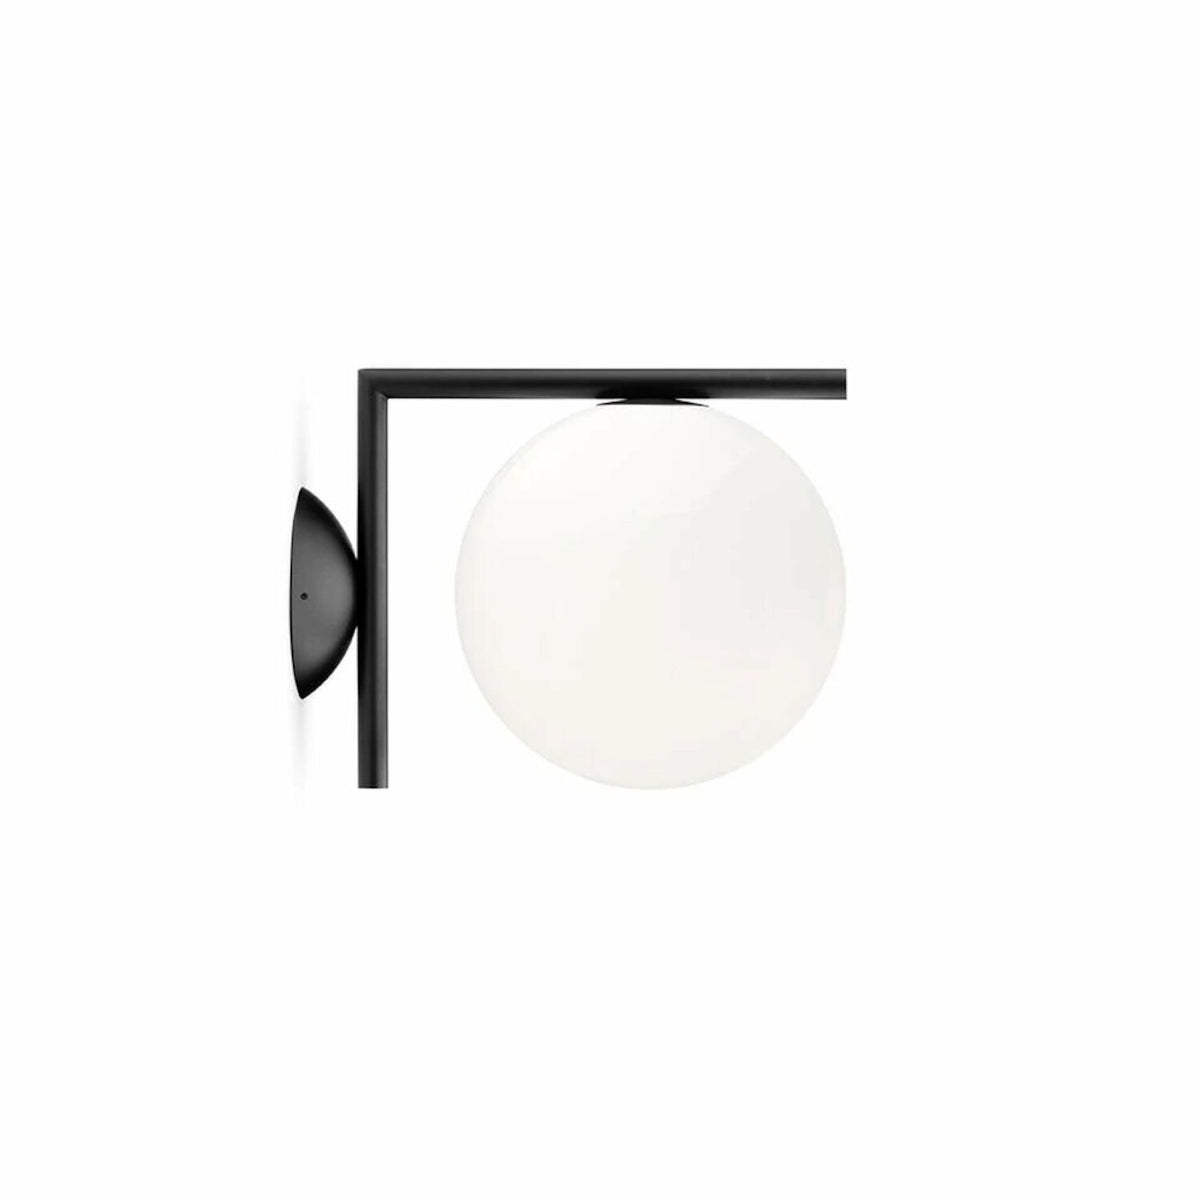 IC LIGHTS C/W1 SCONCE WALL AND CEILING LIGHT BY MICHAEL ANASTASSIADES